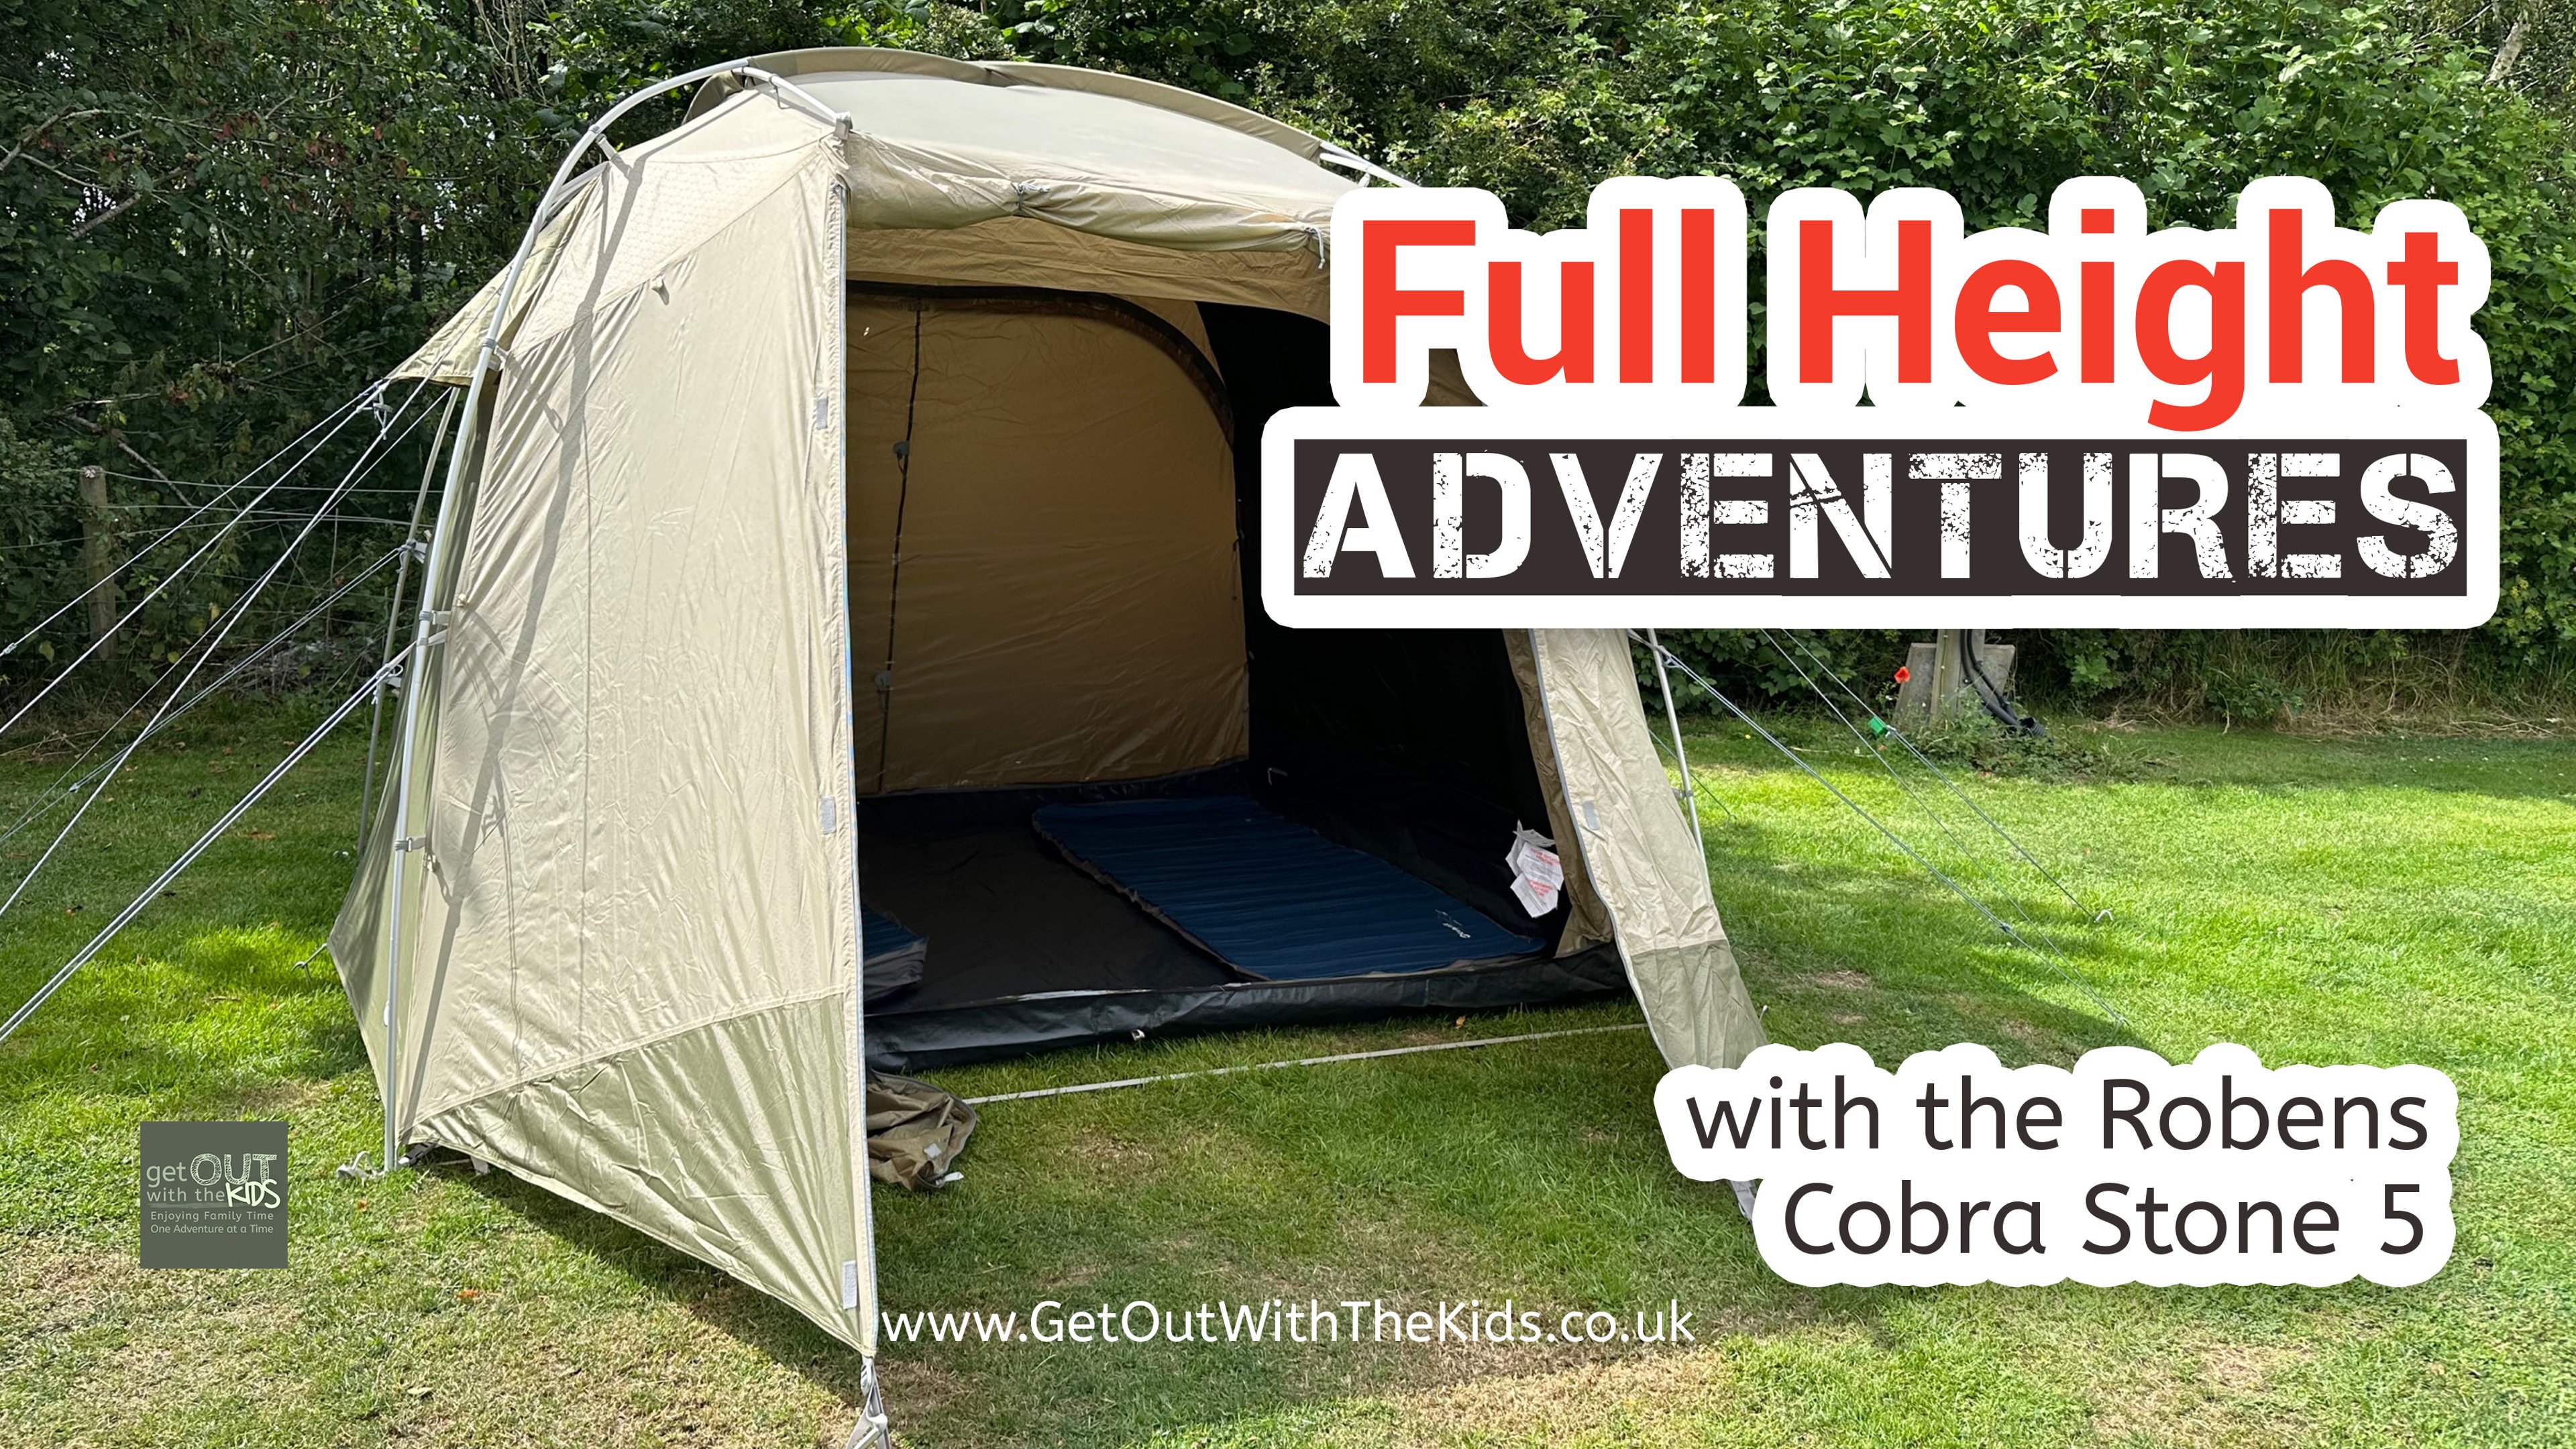 The Robens Cobra Stone 5 tent pitched at a campsite with the door of the tent open 